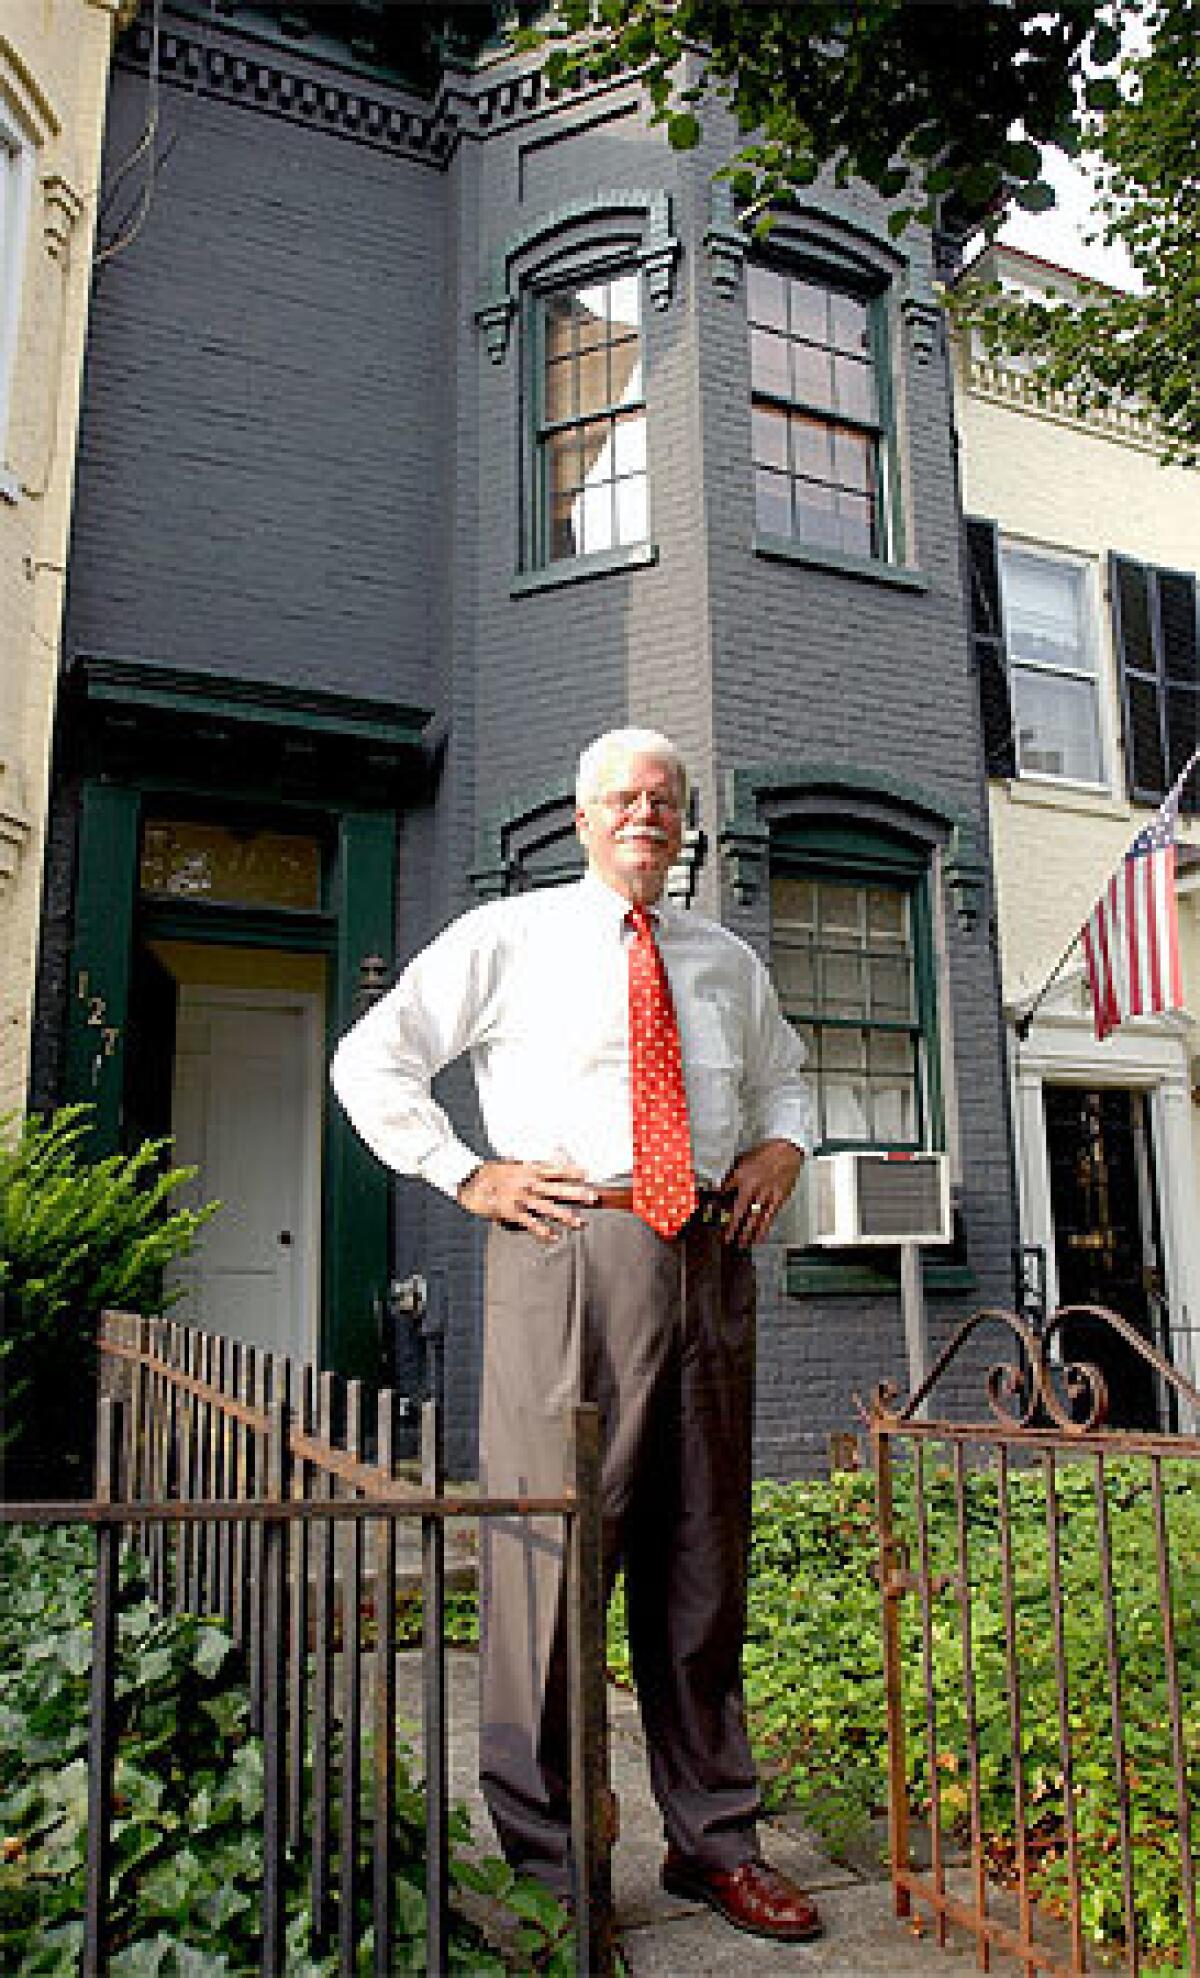 LIVE-IN LANDLORD: Rep. George Miller in front of his Washington town house (the animal house) that he has shared with various fellow Democrats for more than 20 years. The house has few rules, but no Republicans are allowed.